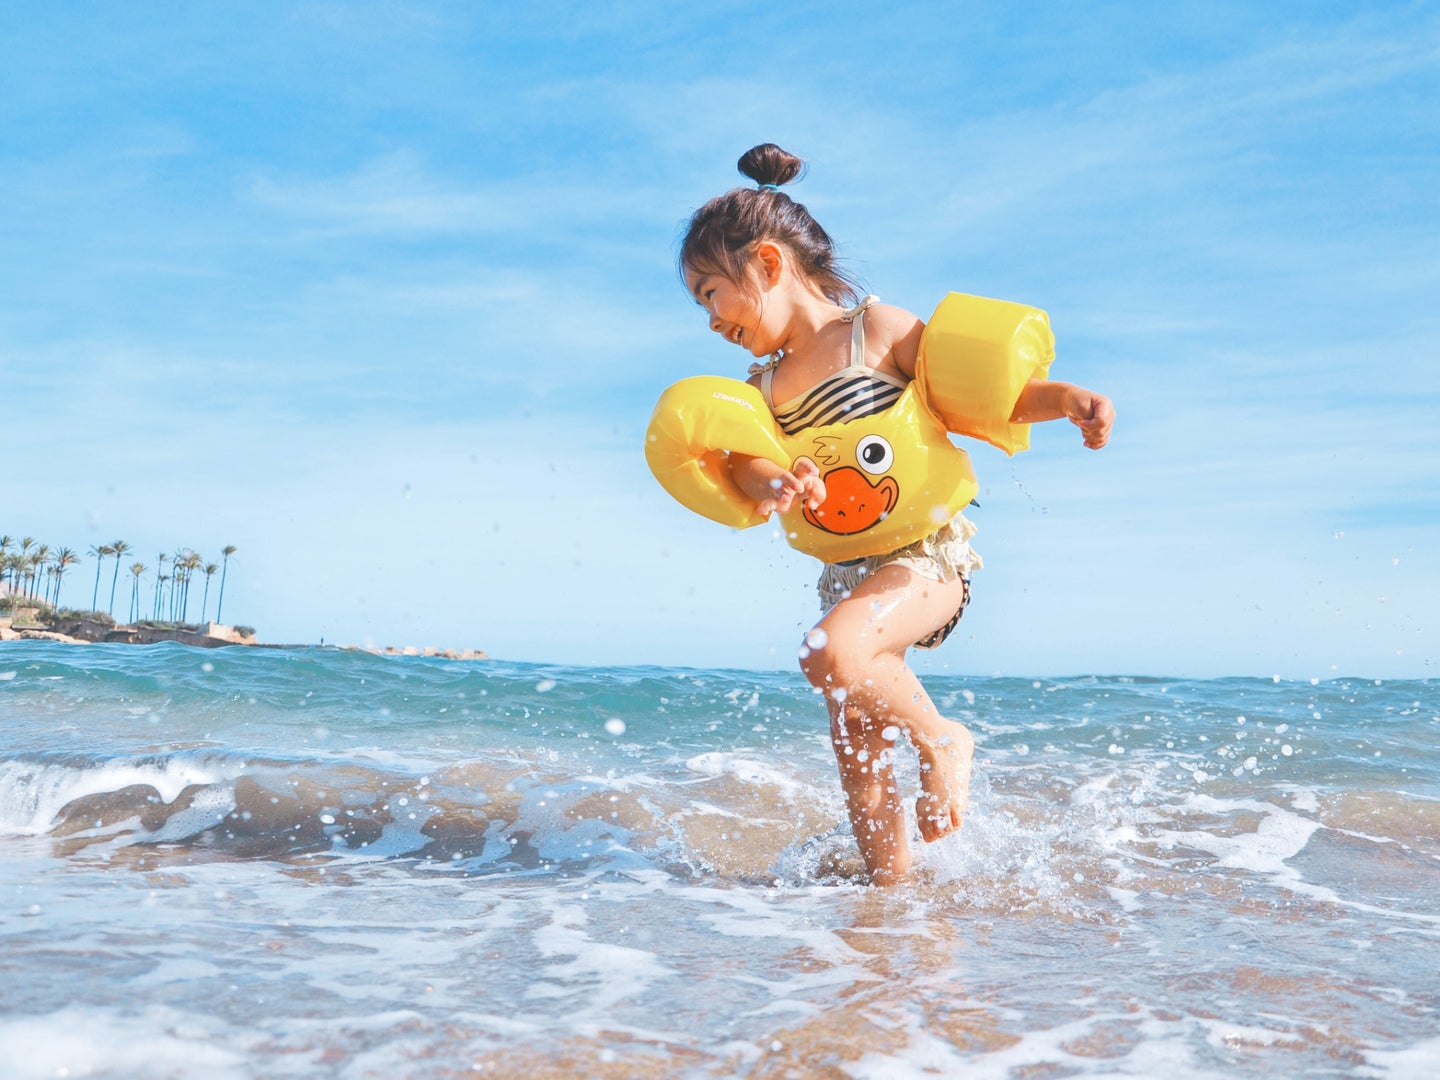 A small child wearing floaties on their arms and waist while playing in the surf of a tropical beach.